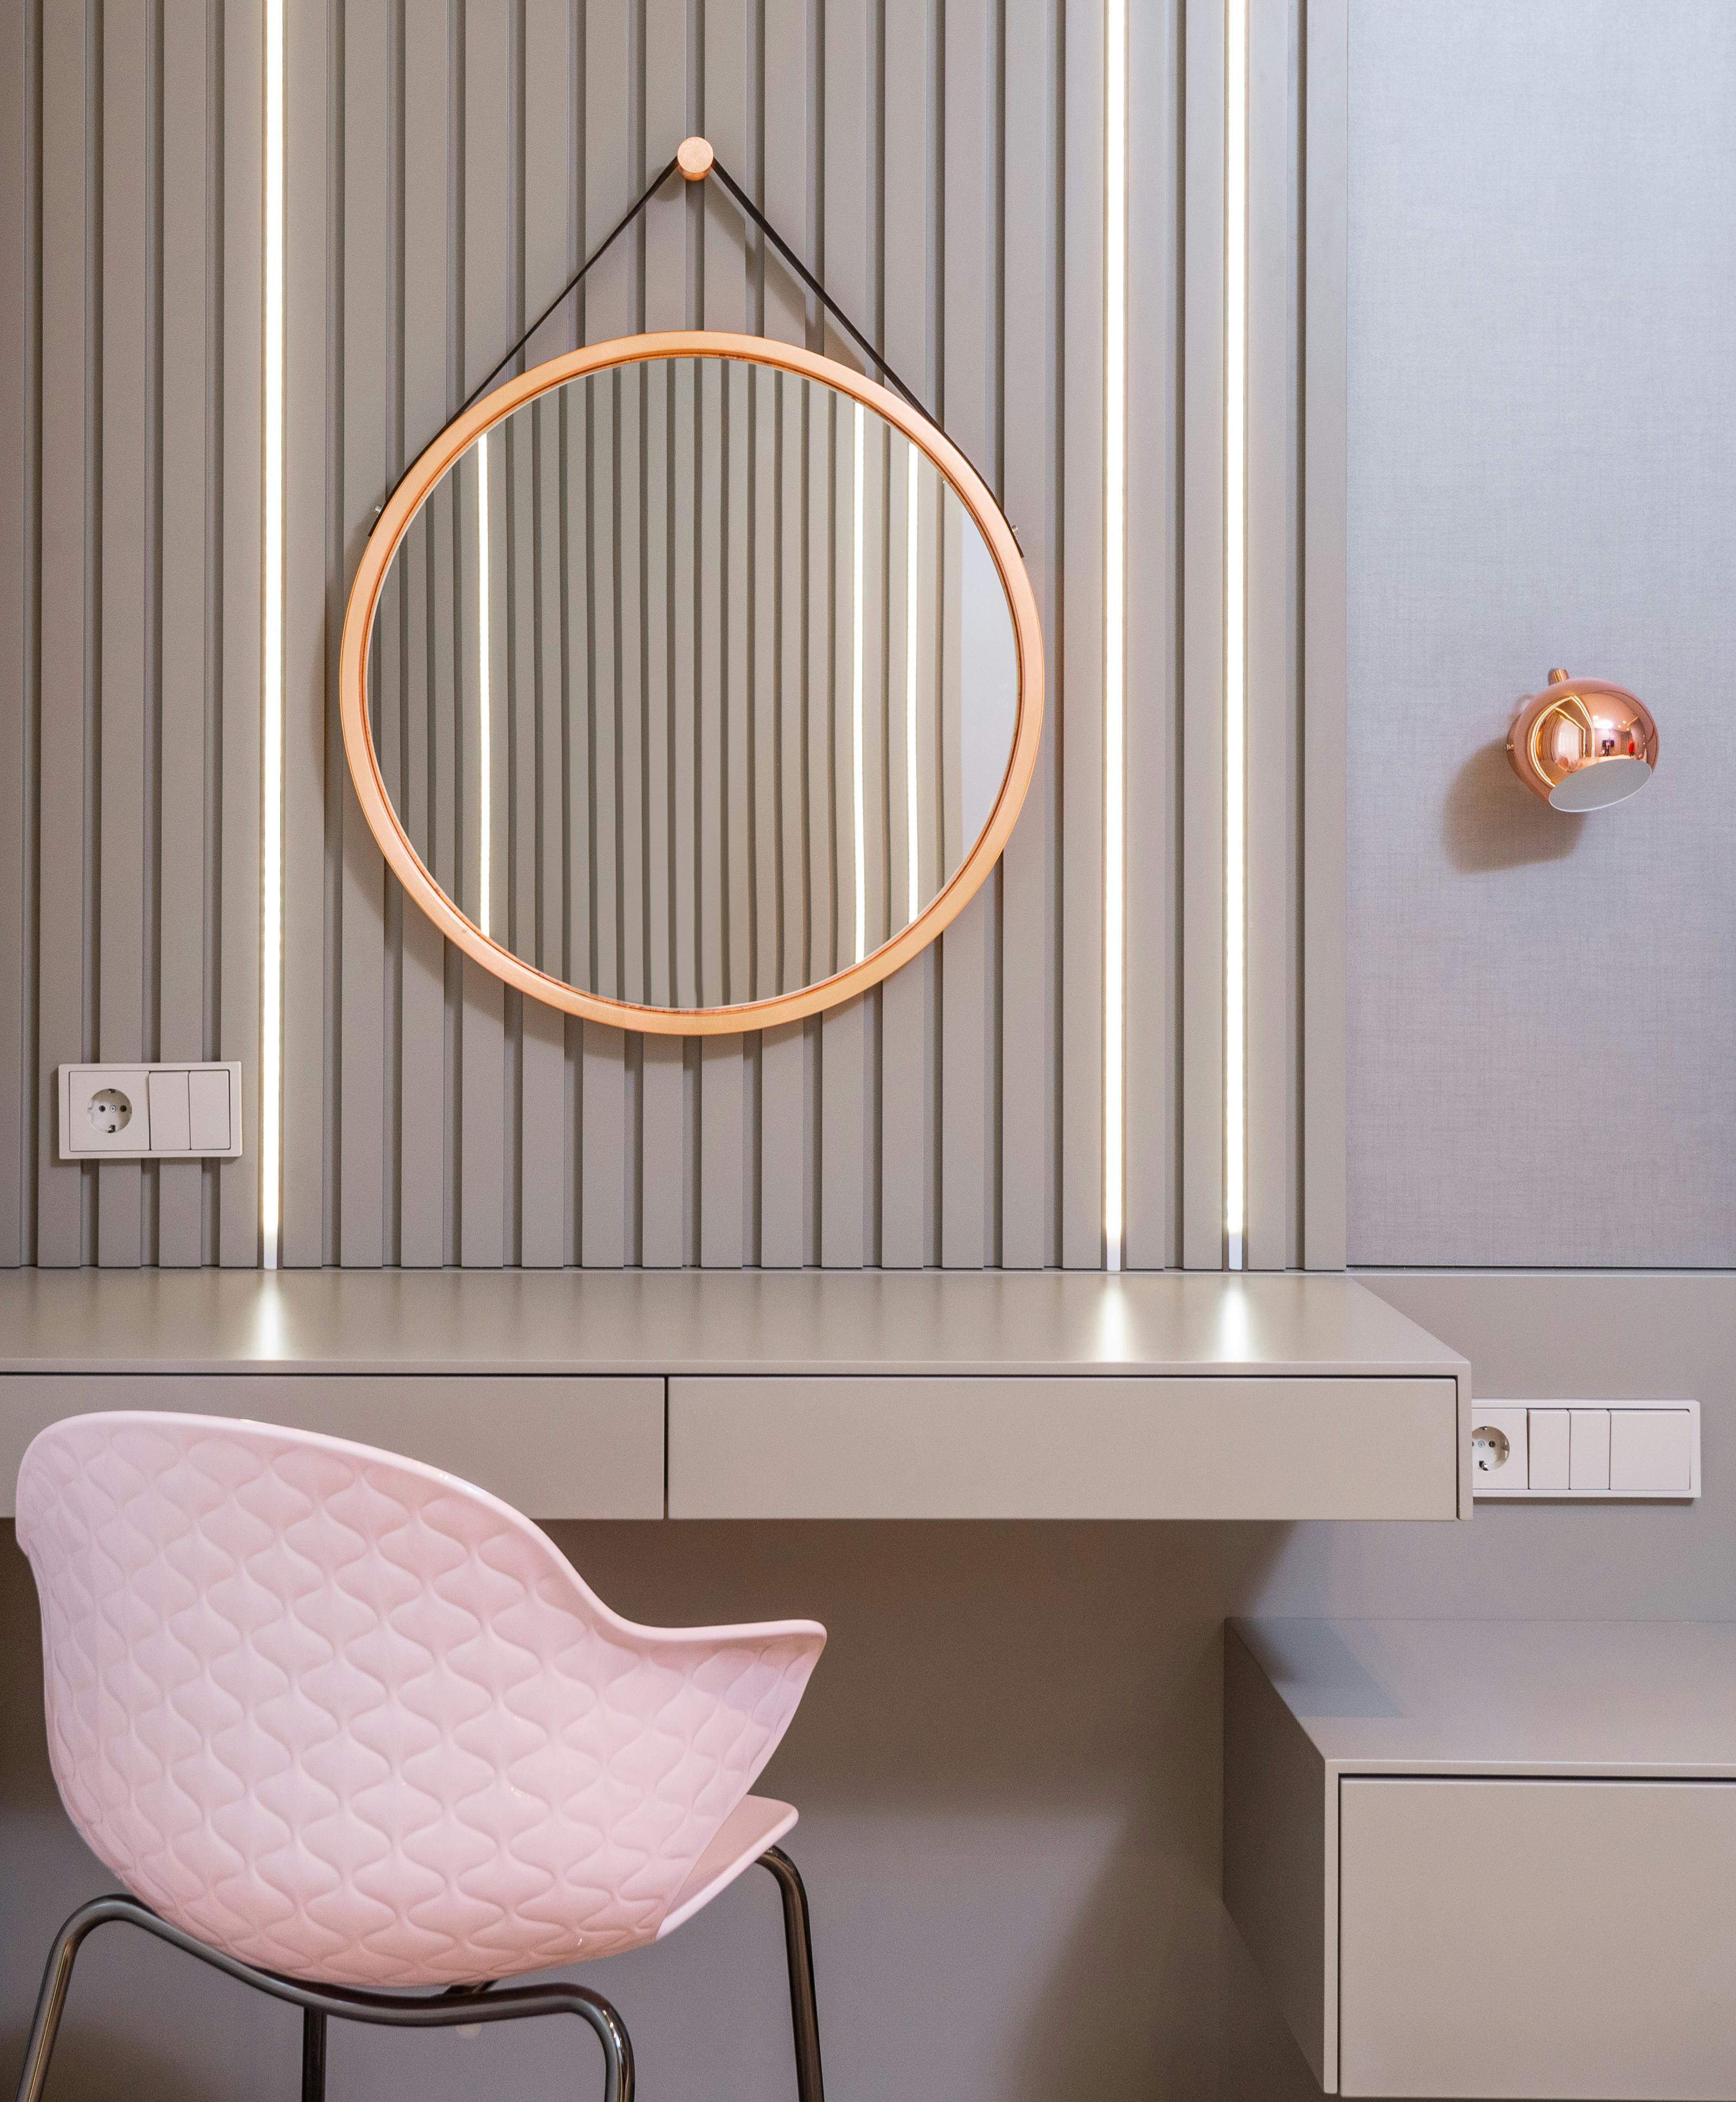 A photo of a vanity table below a round mirror | Source: Pexels